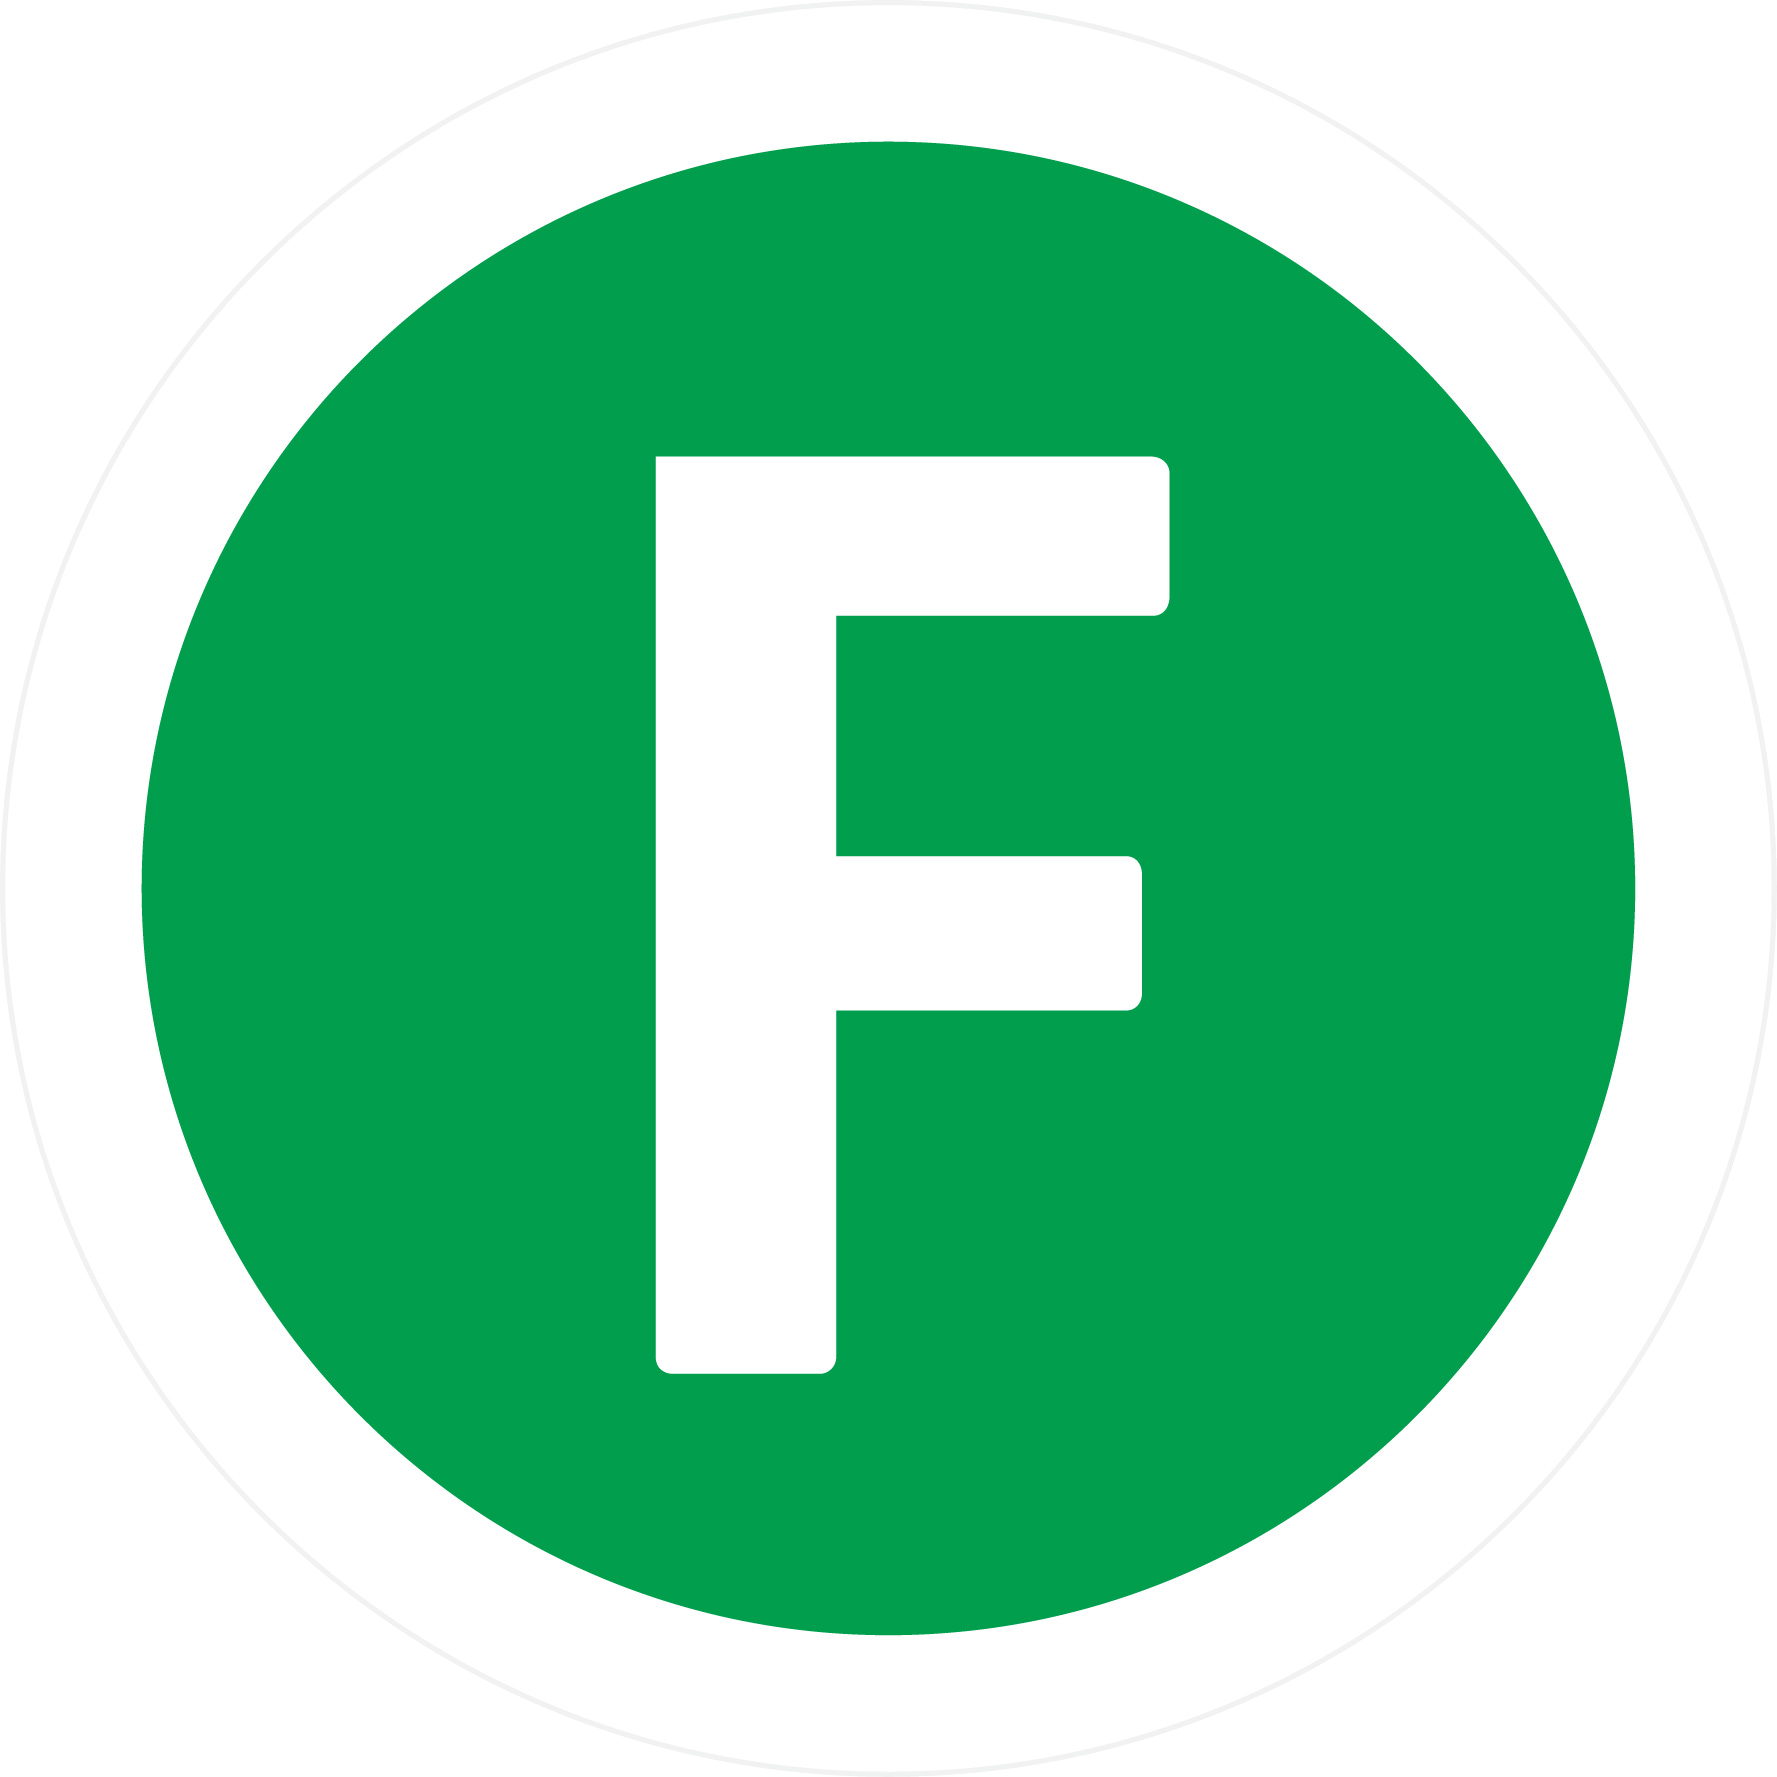 A Green Circle With White Letter F In It